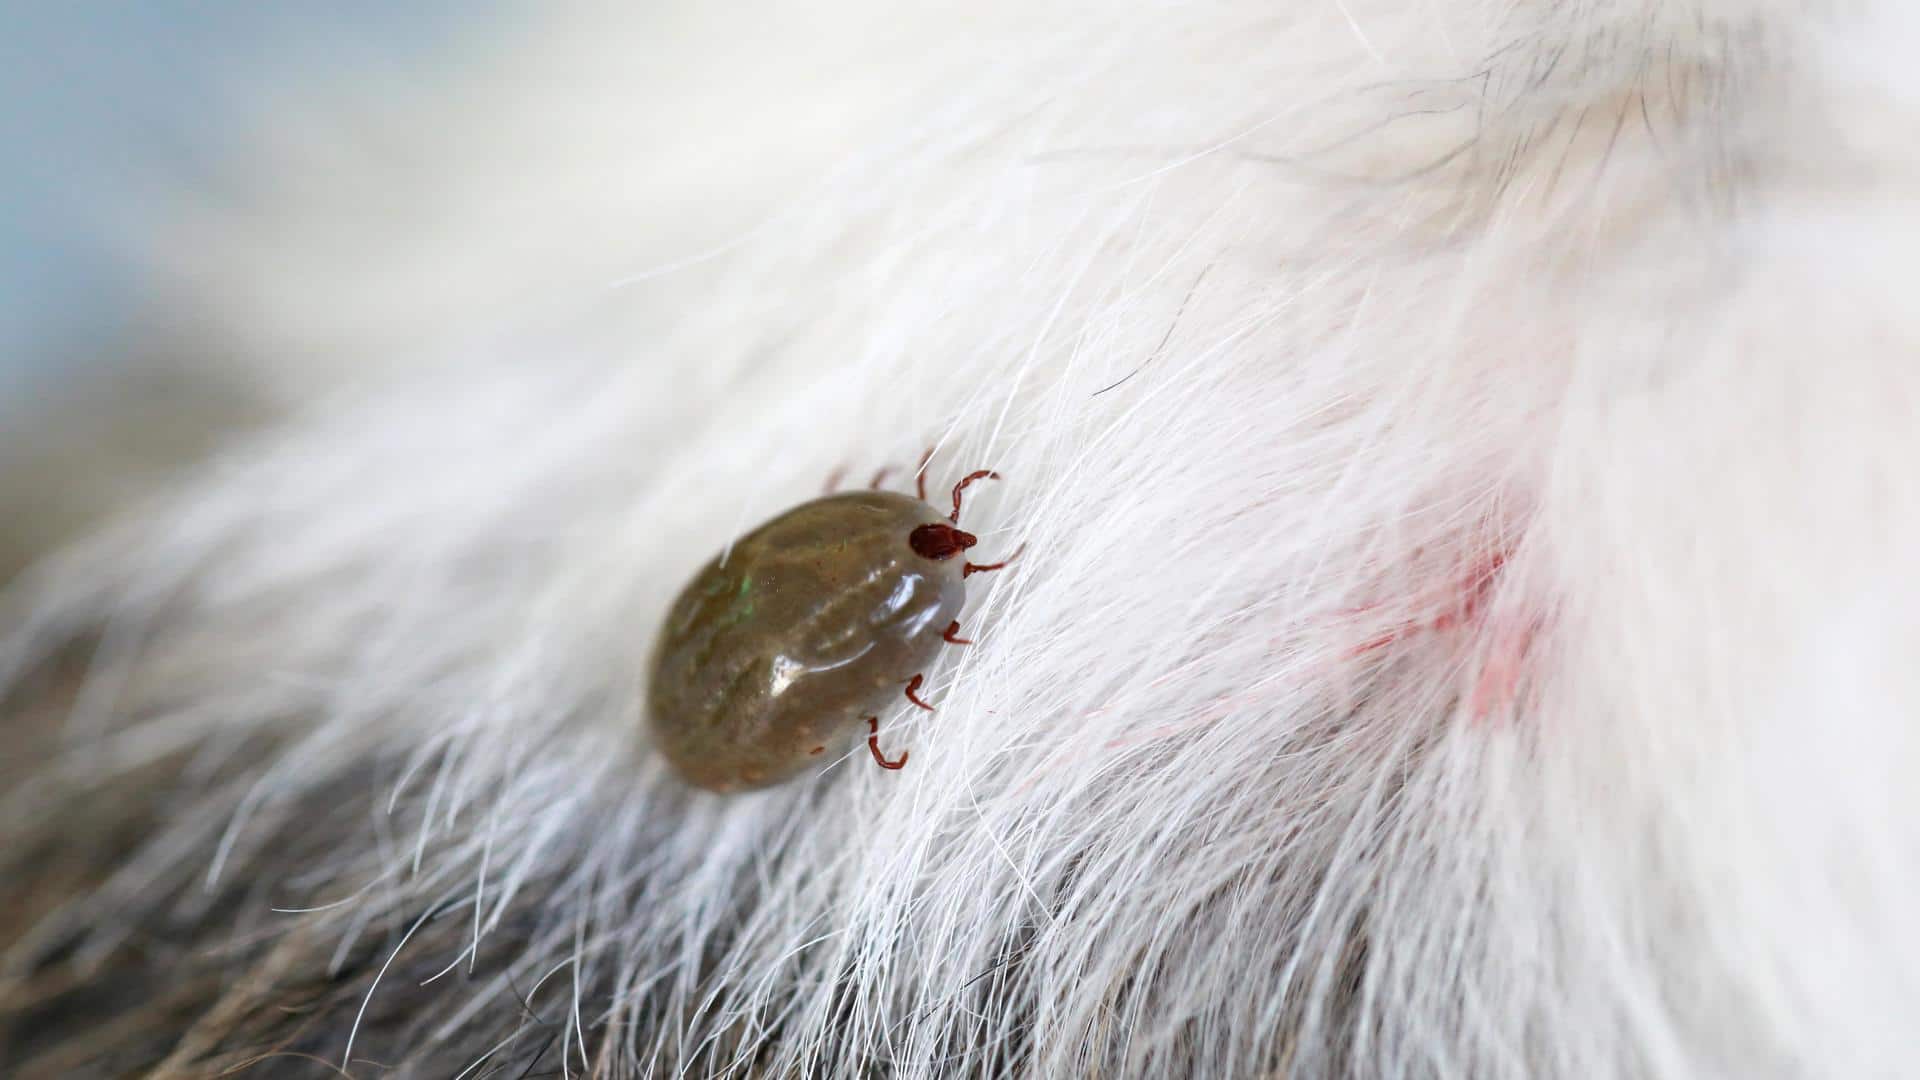 Ticks in your dog? Try these home remedies